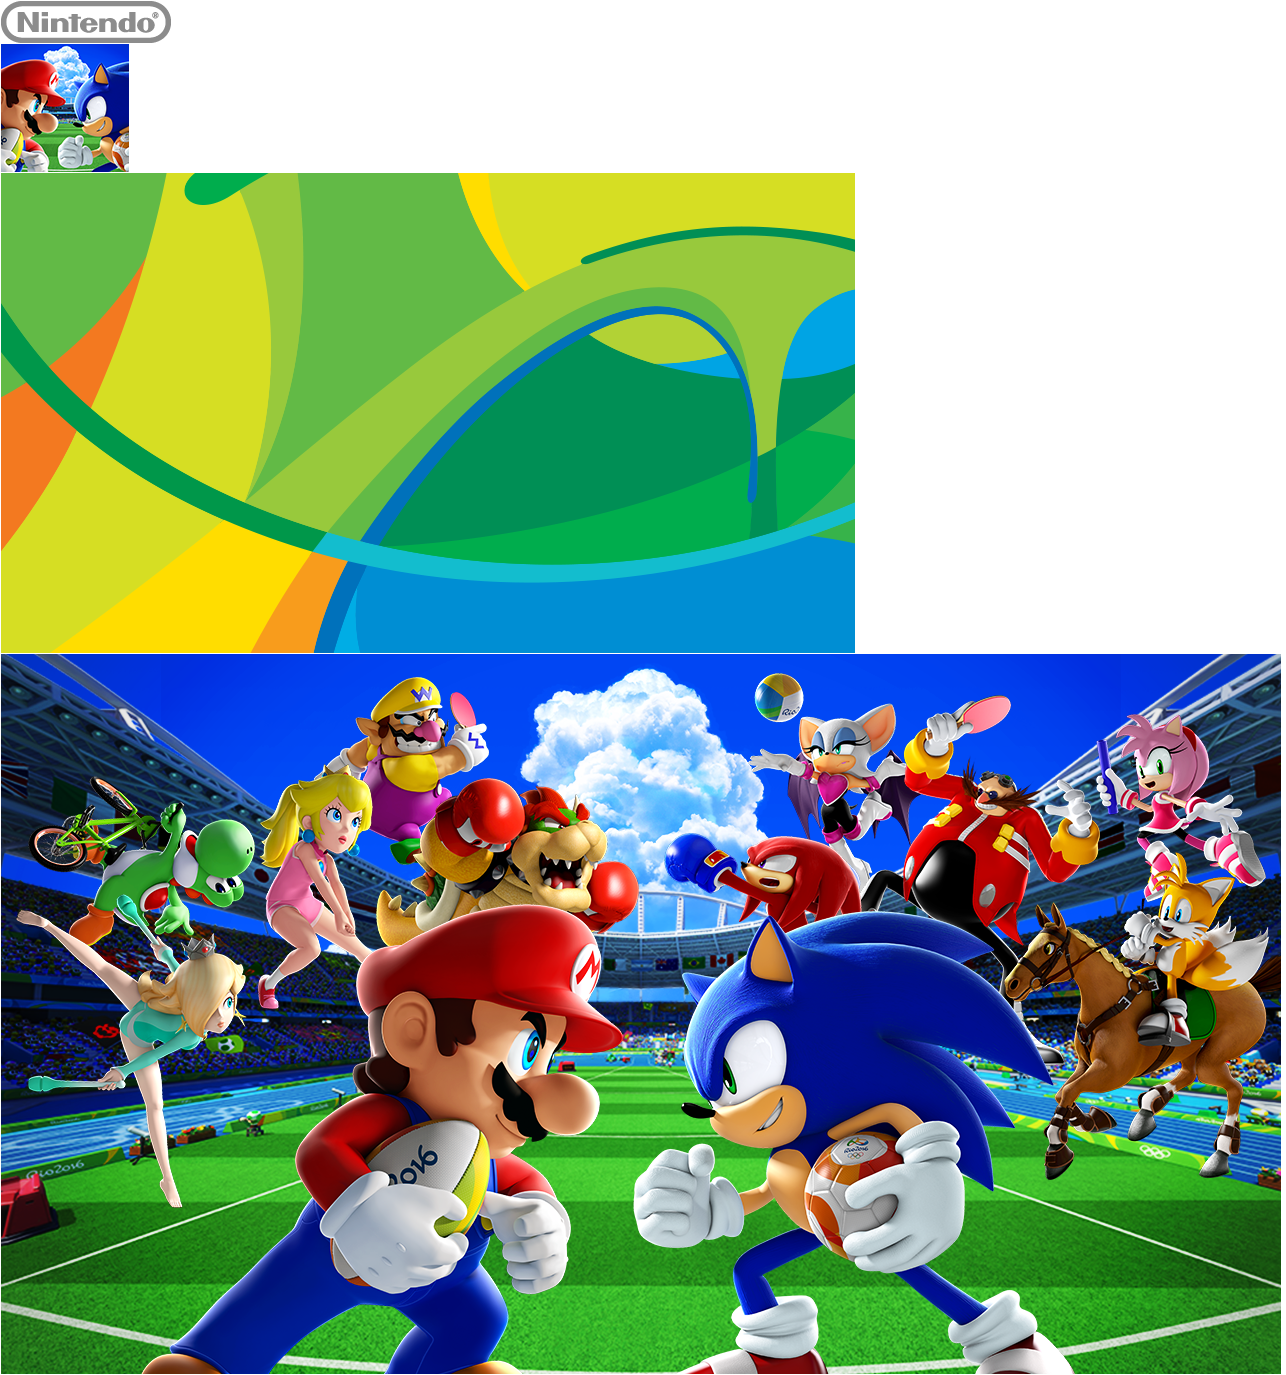 Mario & Sonic at the Rio 2016 Olympic Games - HOME Menu Icon and Banners